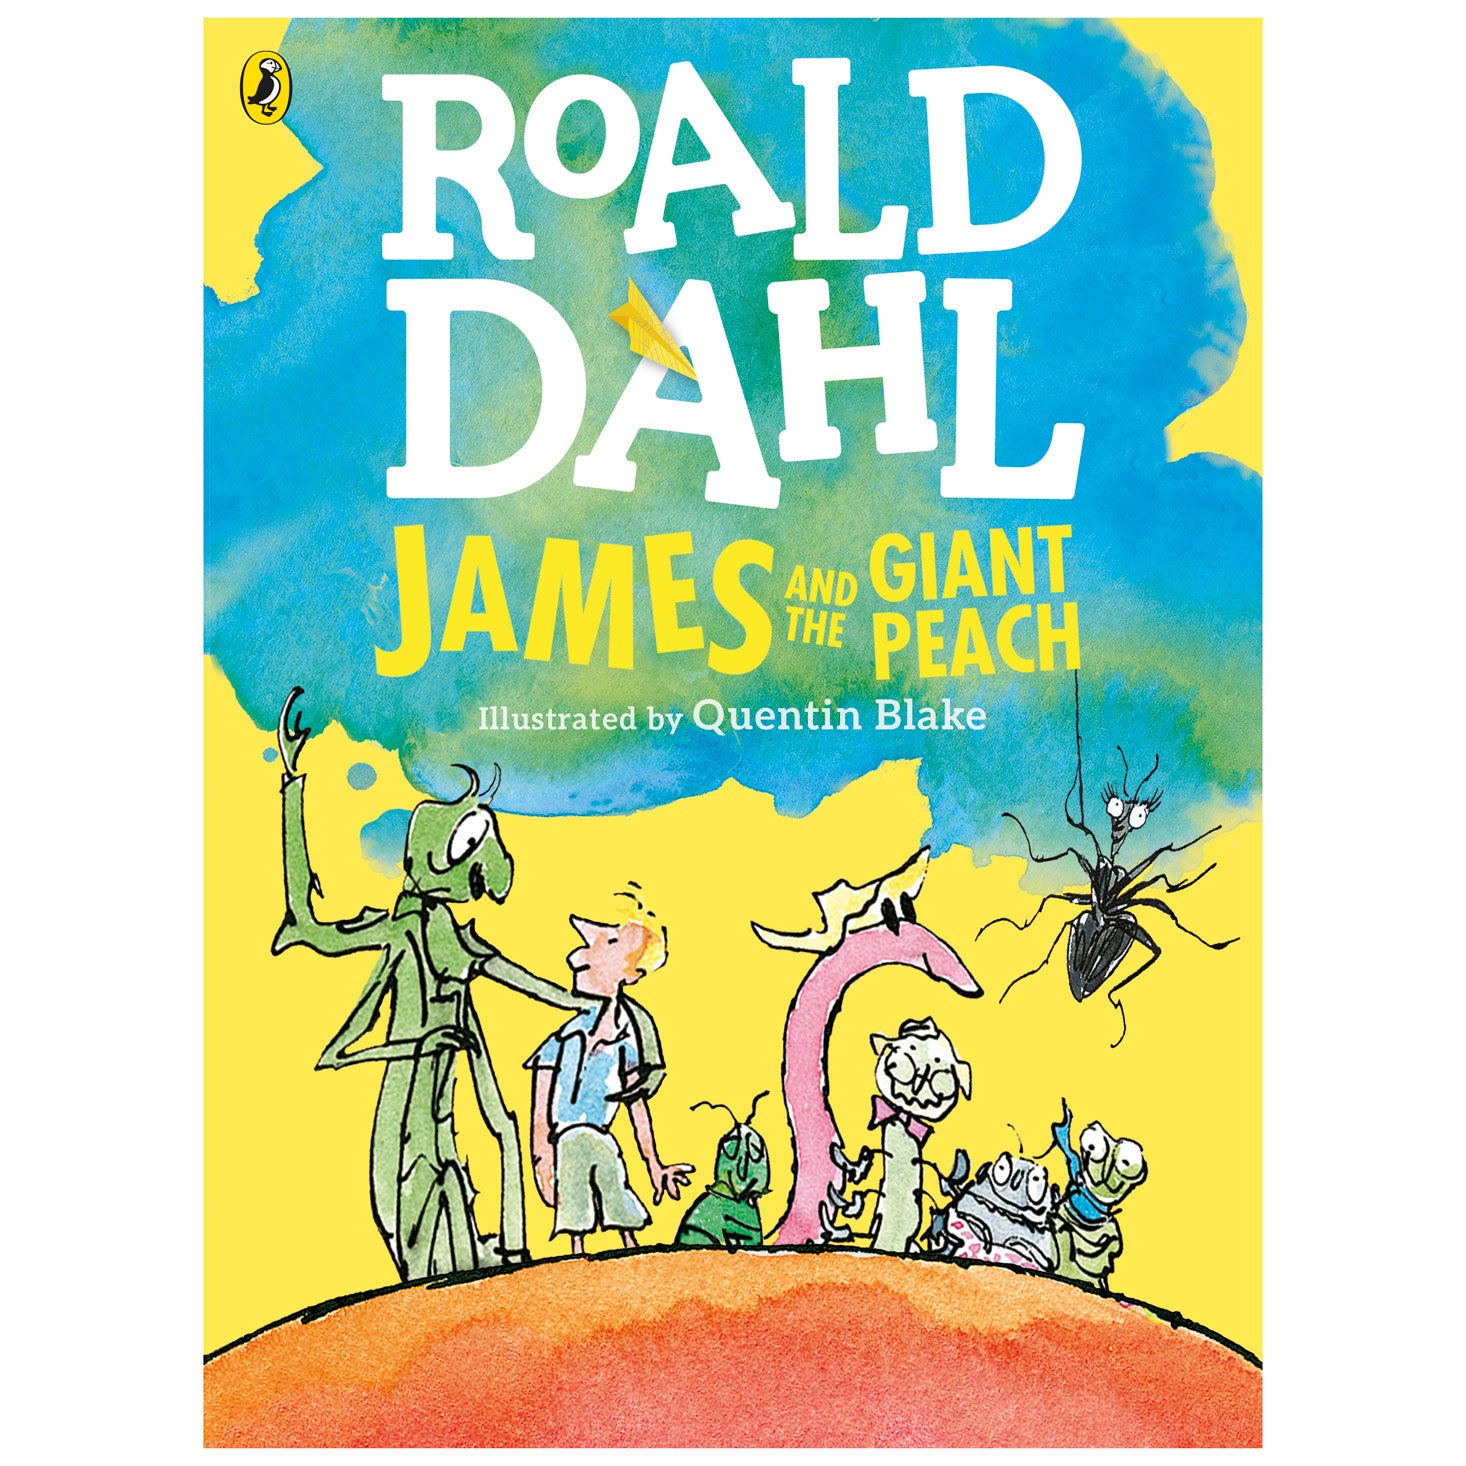 James and the Giant Peach by Roald Dahl with illustrations by Quentin Blake